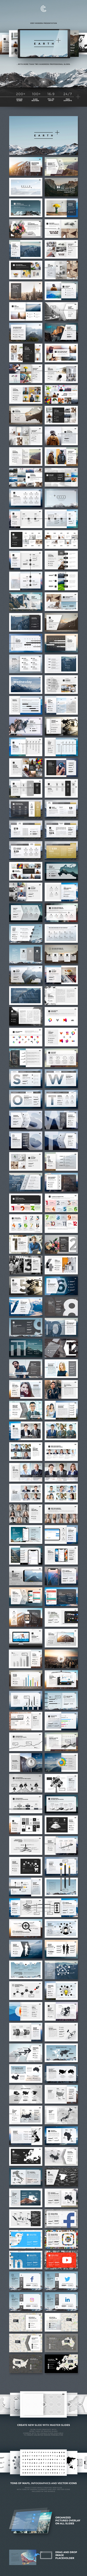 GraphicRiver Earth PowerPoint 20836318